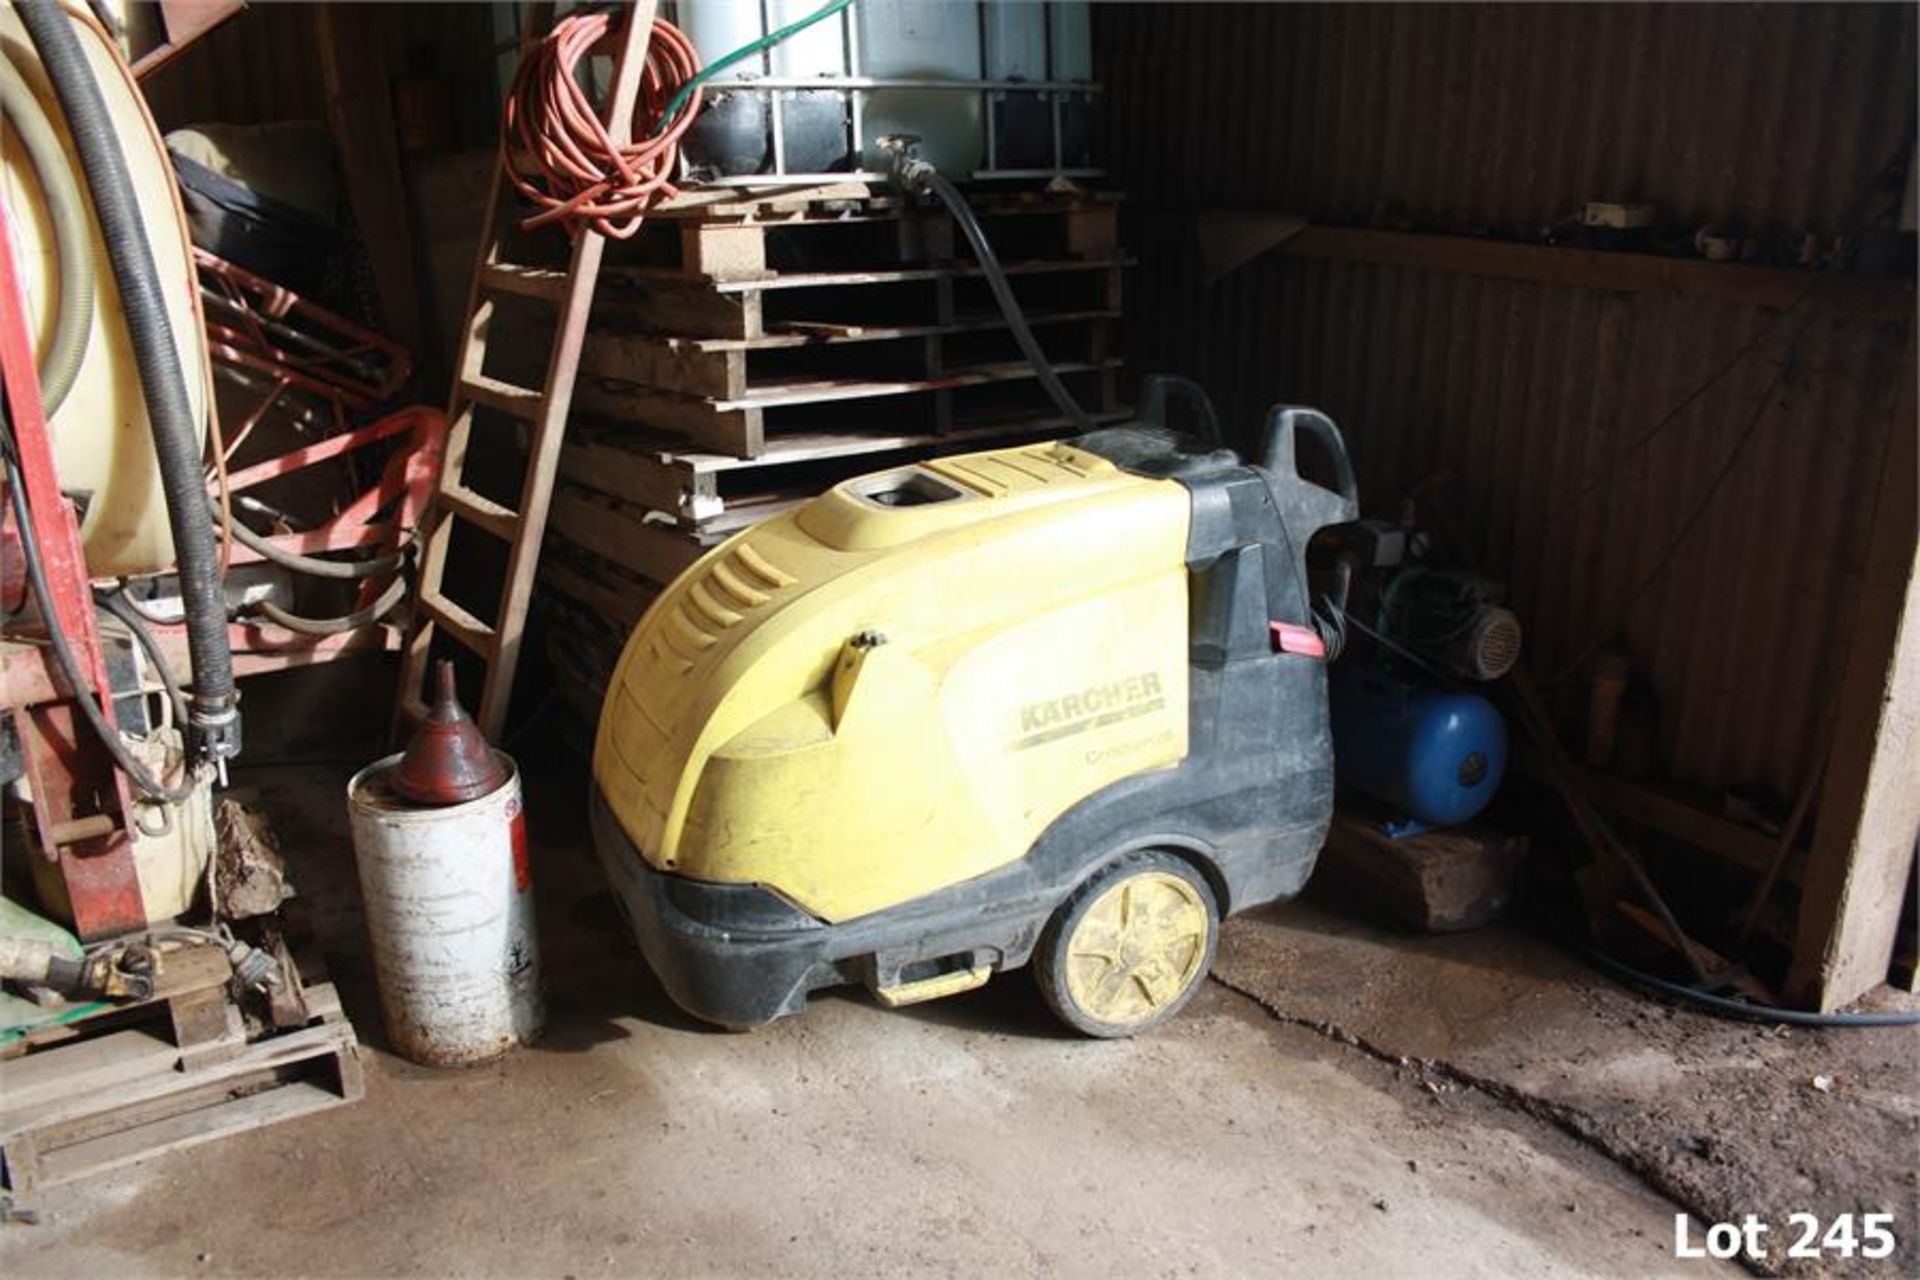 Karcher Commercial Steam Cleaner / pressure washer with lance